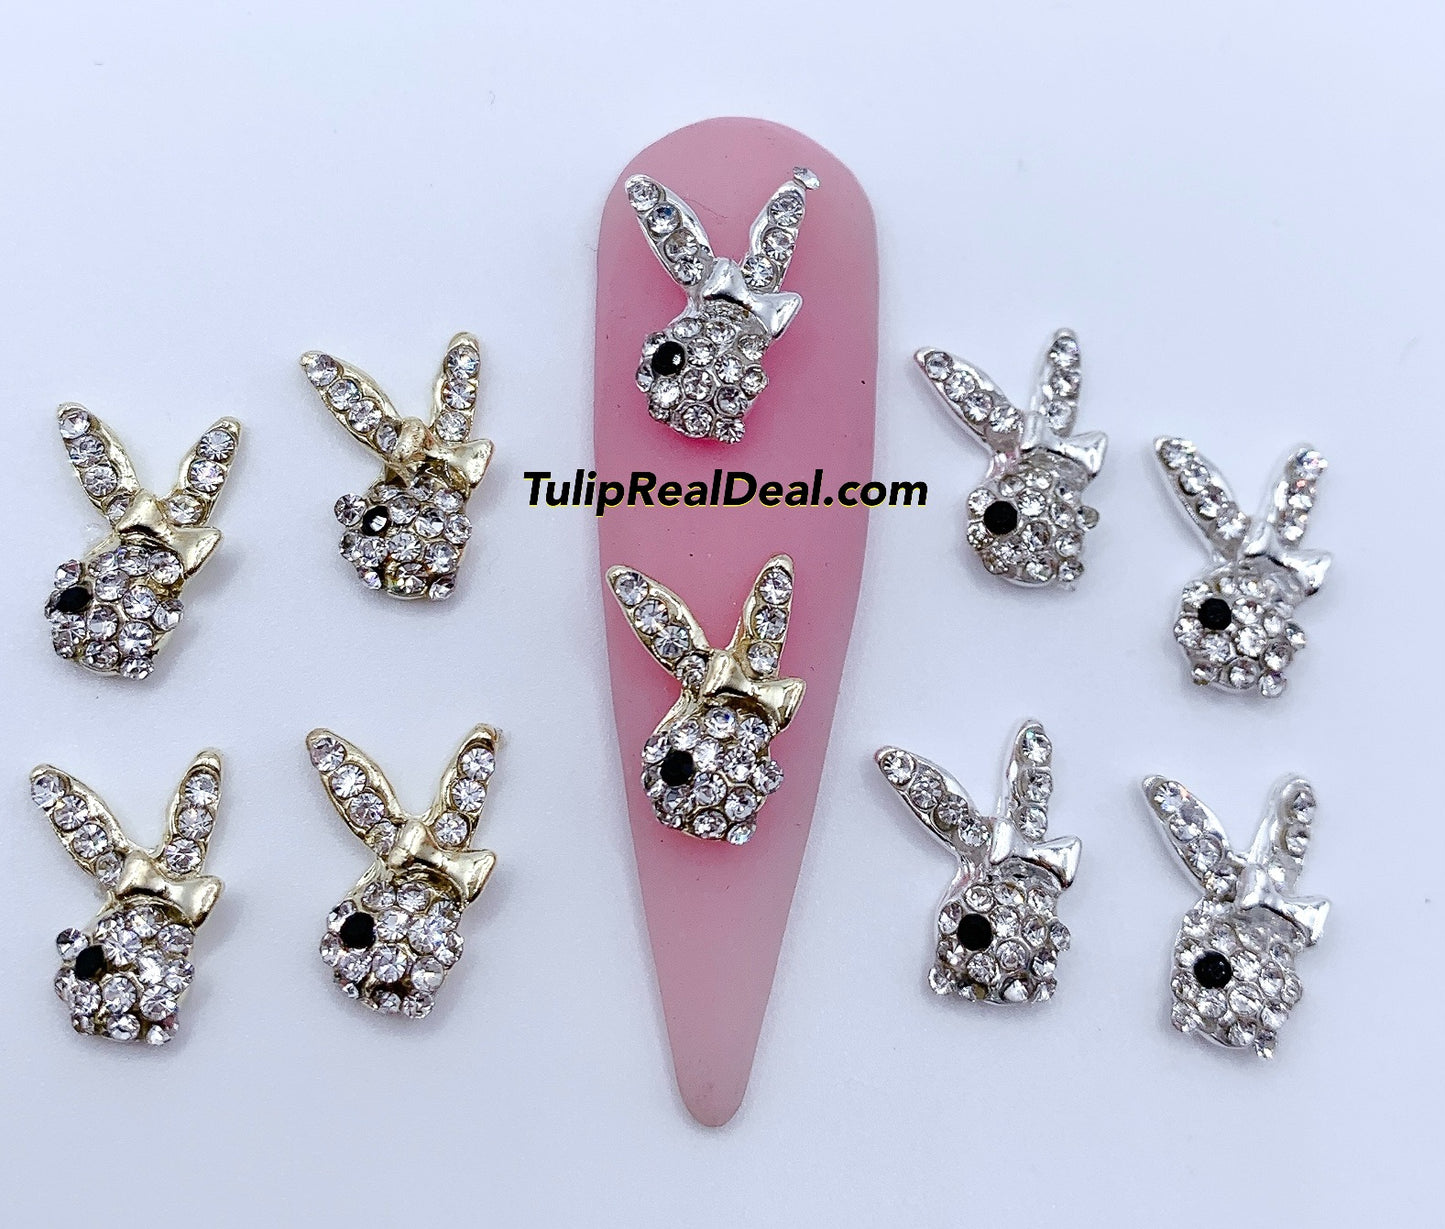 BOW Bunny Bling 3D charms 5pcs